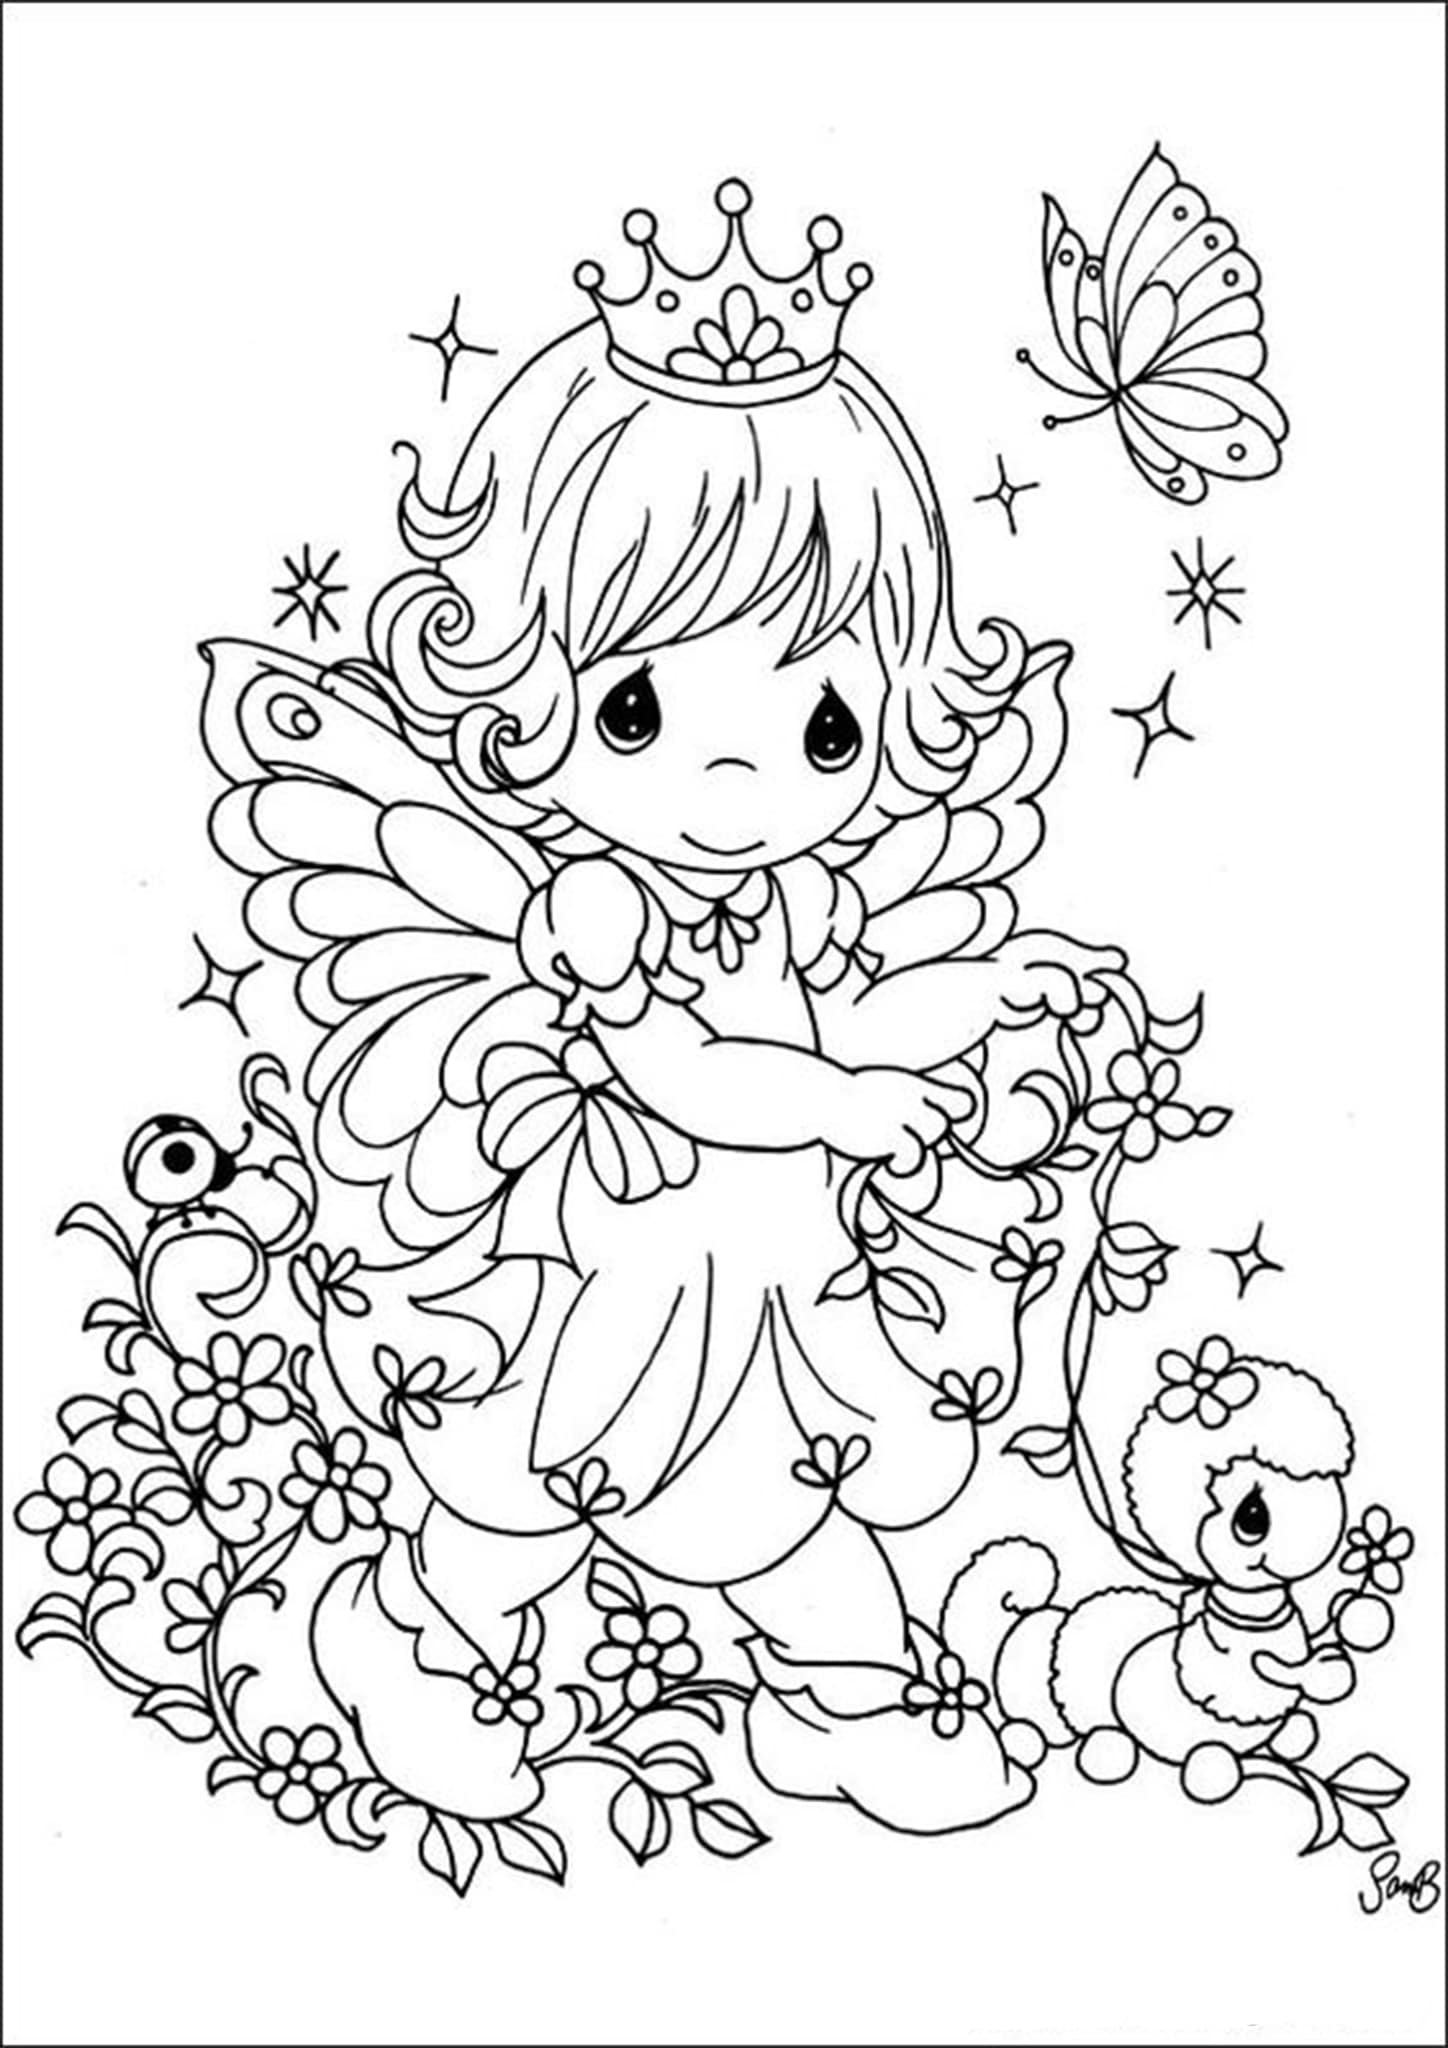 Download Free & Easy To Print Fairy Coloring Pages - Tulamama